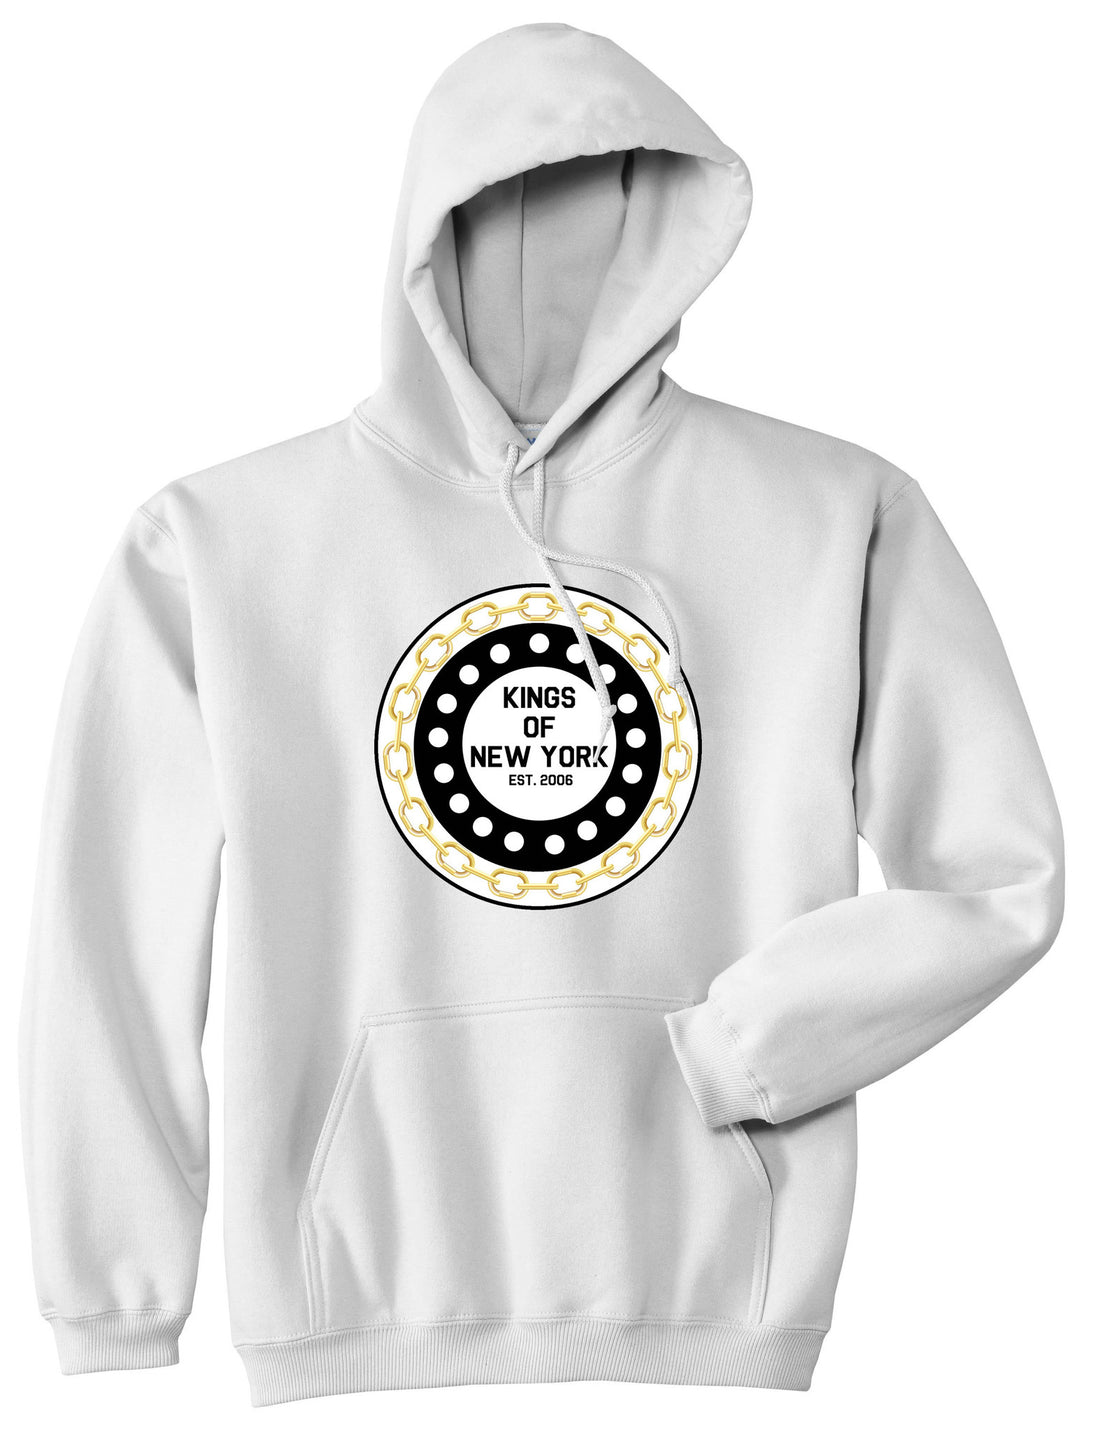 Chain Logo New York Brooklyn Bronx Pullover Hoodie Hoody in White by Kings Of NY